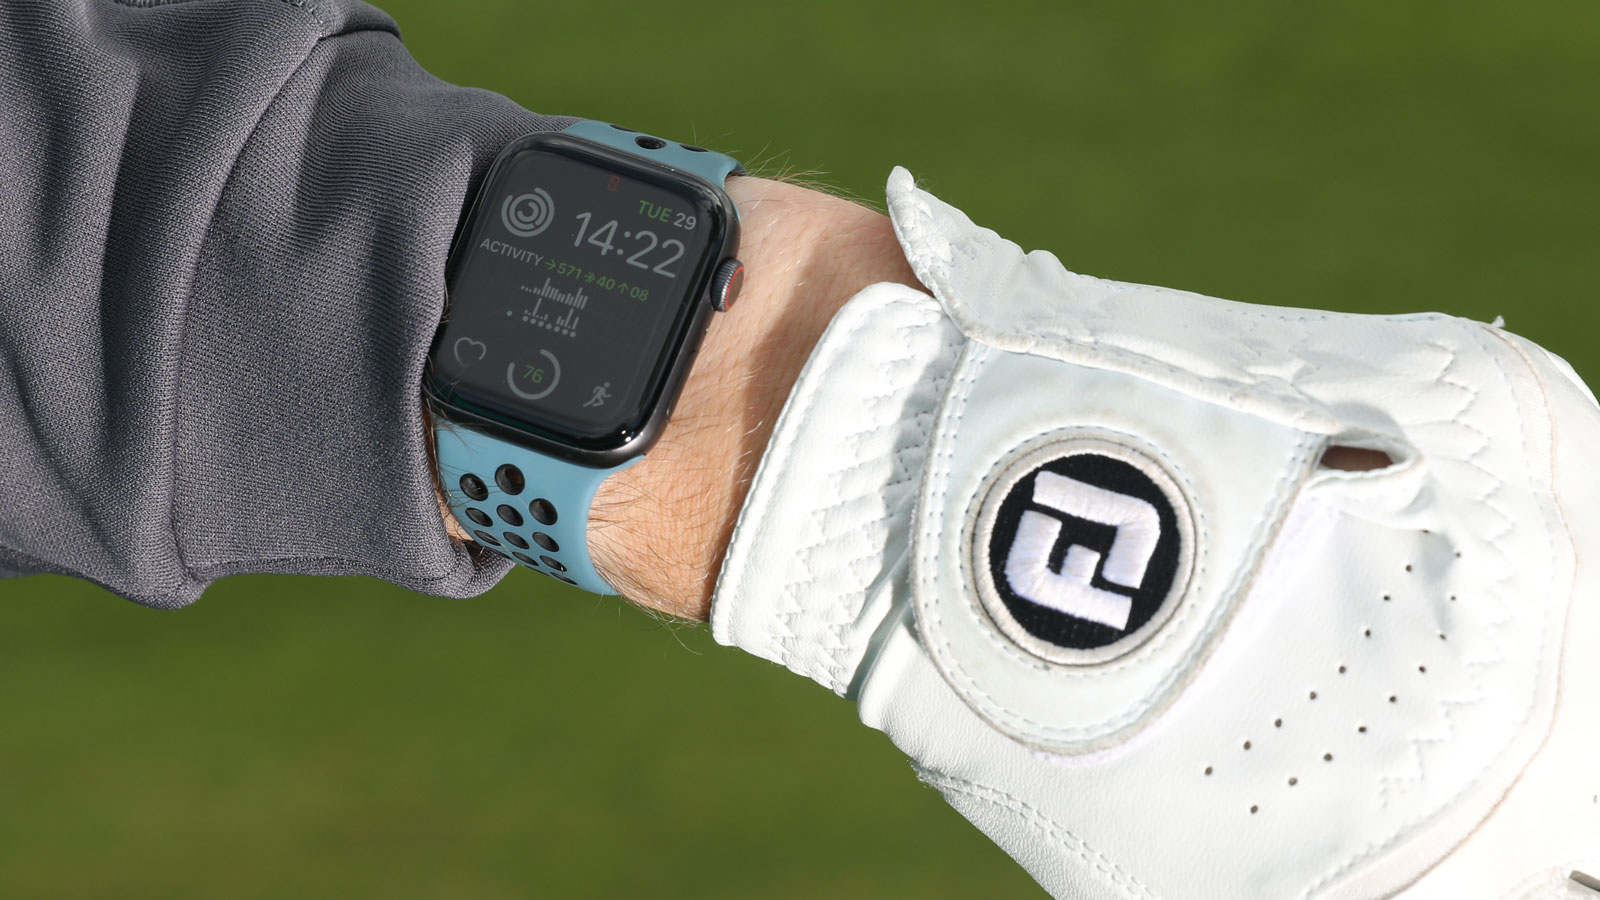 Hole19 Golf GPS for Smartwatch is here!